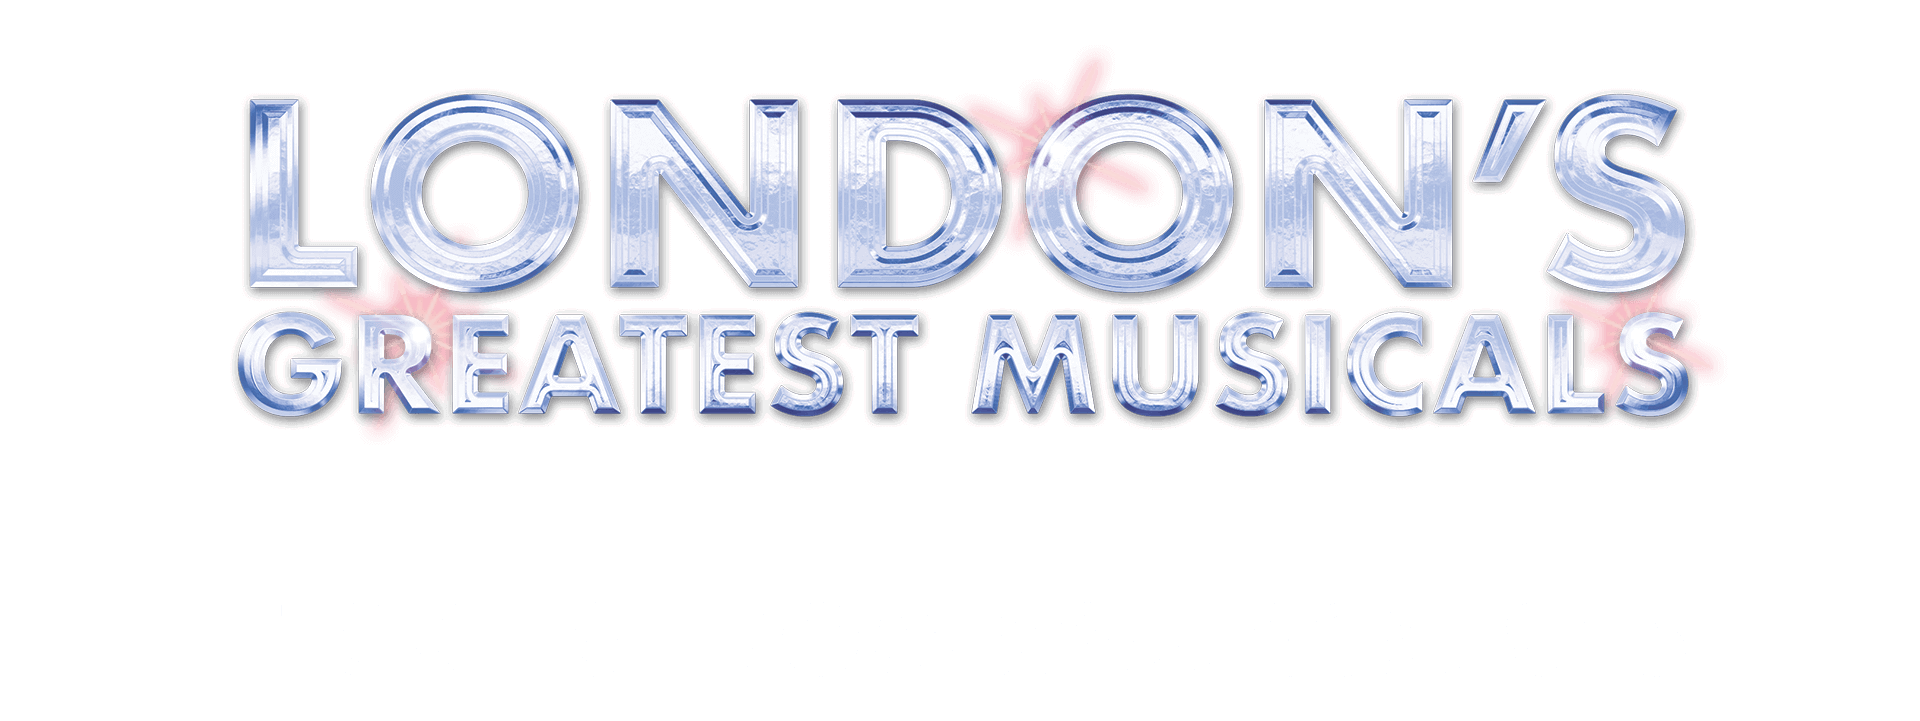 London's Greatest Musicals At the best prices - tickets from £25, £35, £45!